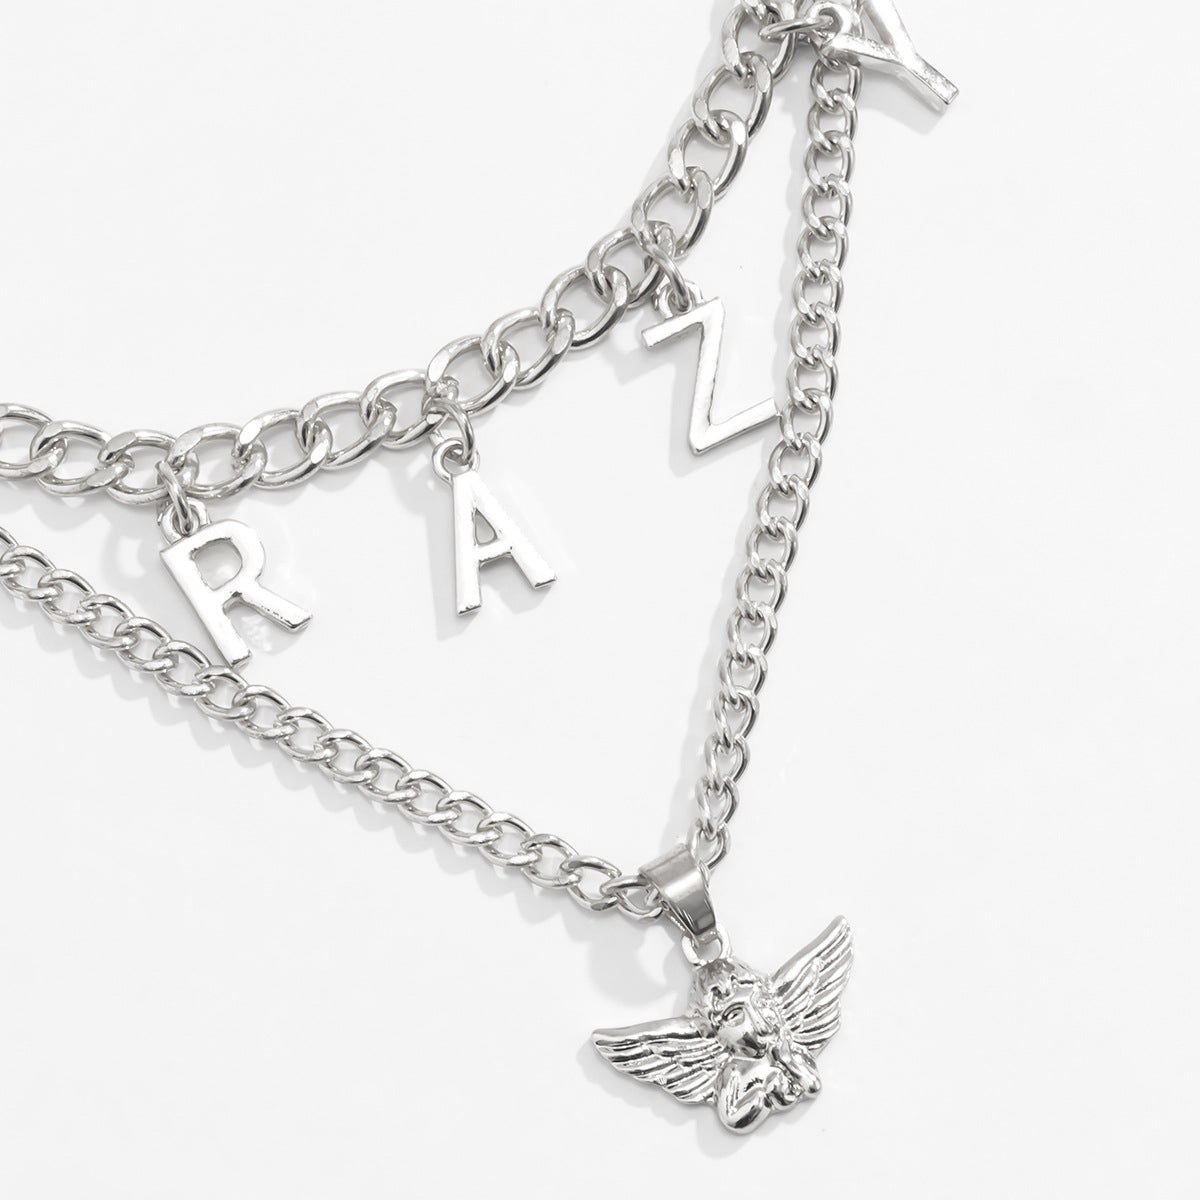 Silver-Plated 'Crazy' Angel Pendant Necklace Set